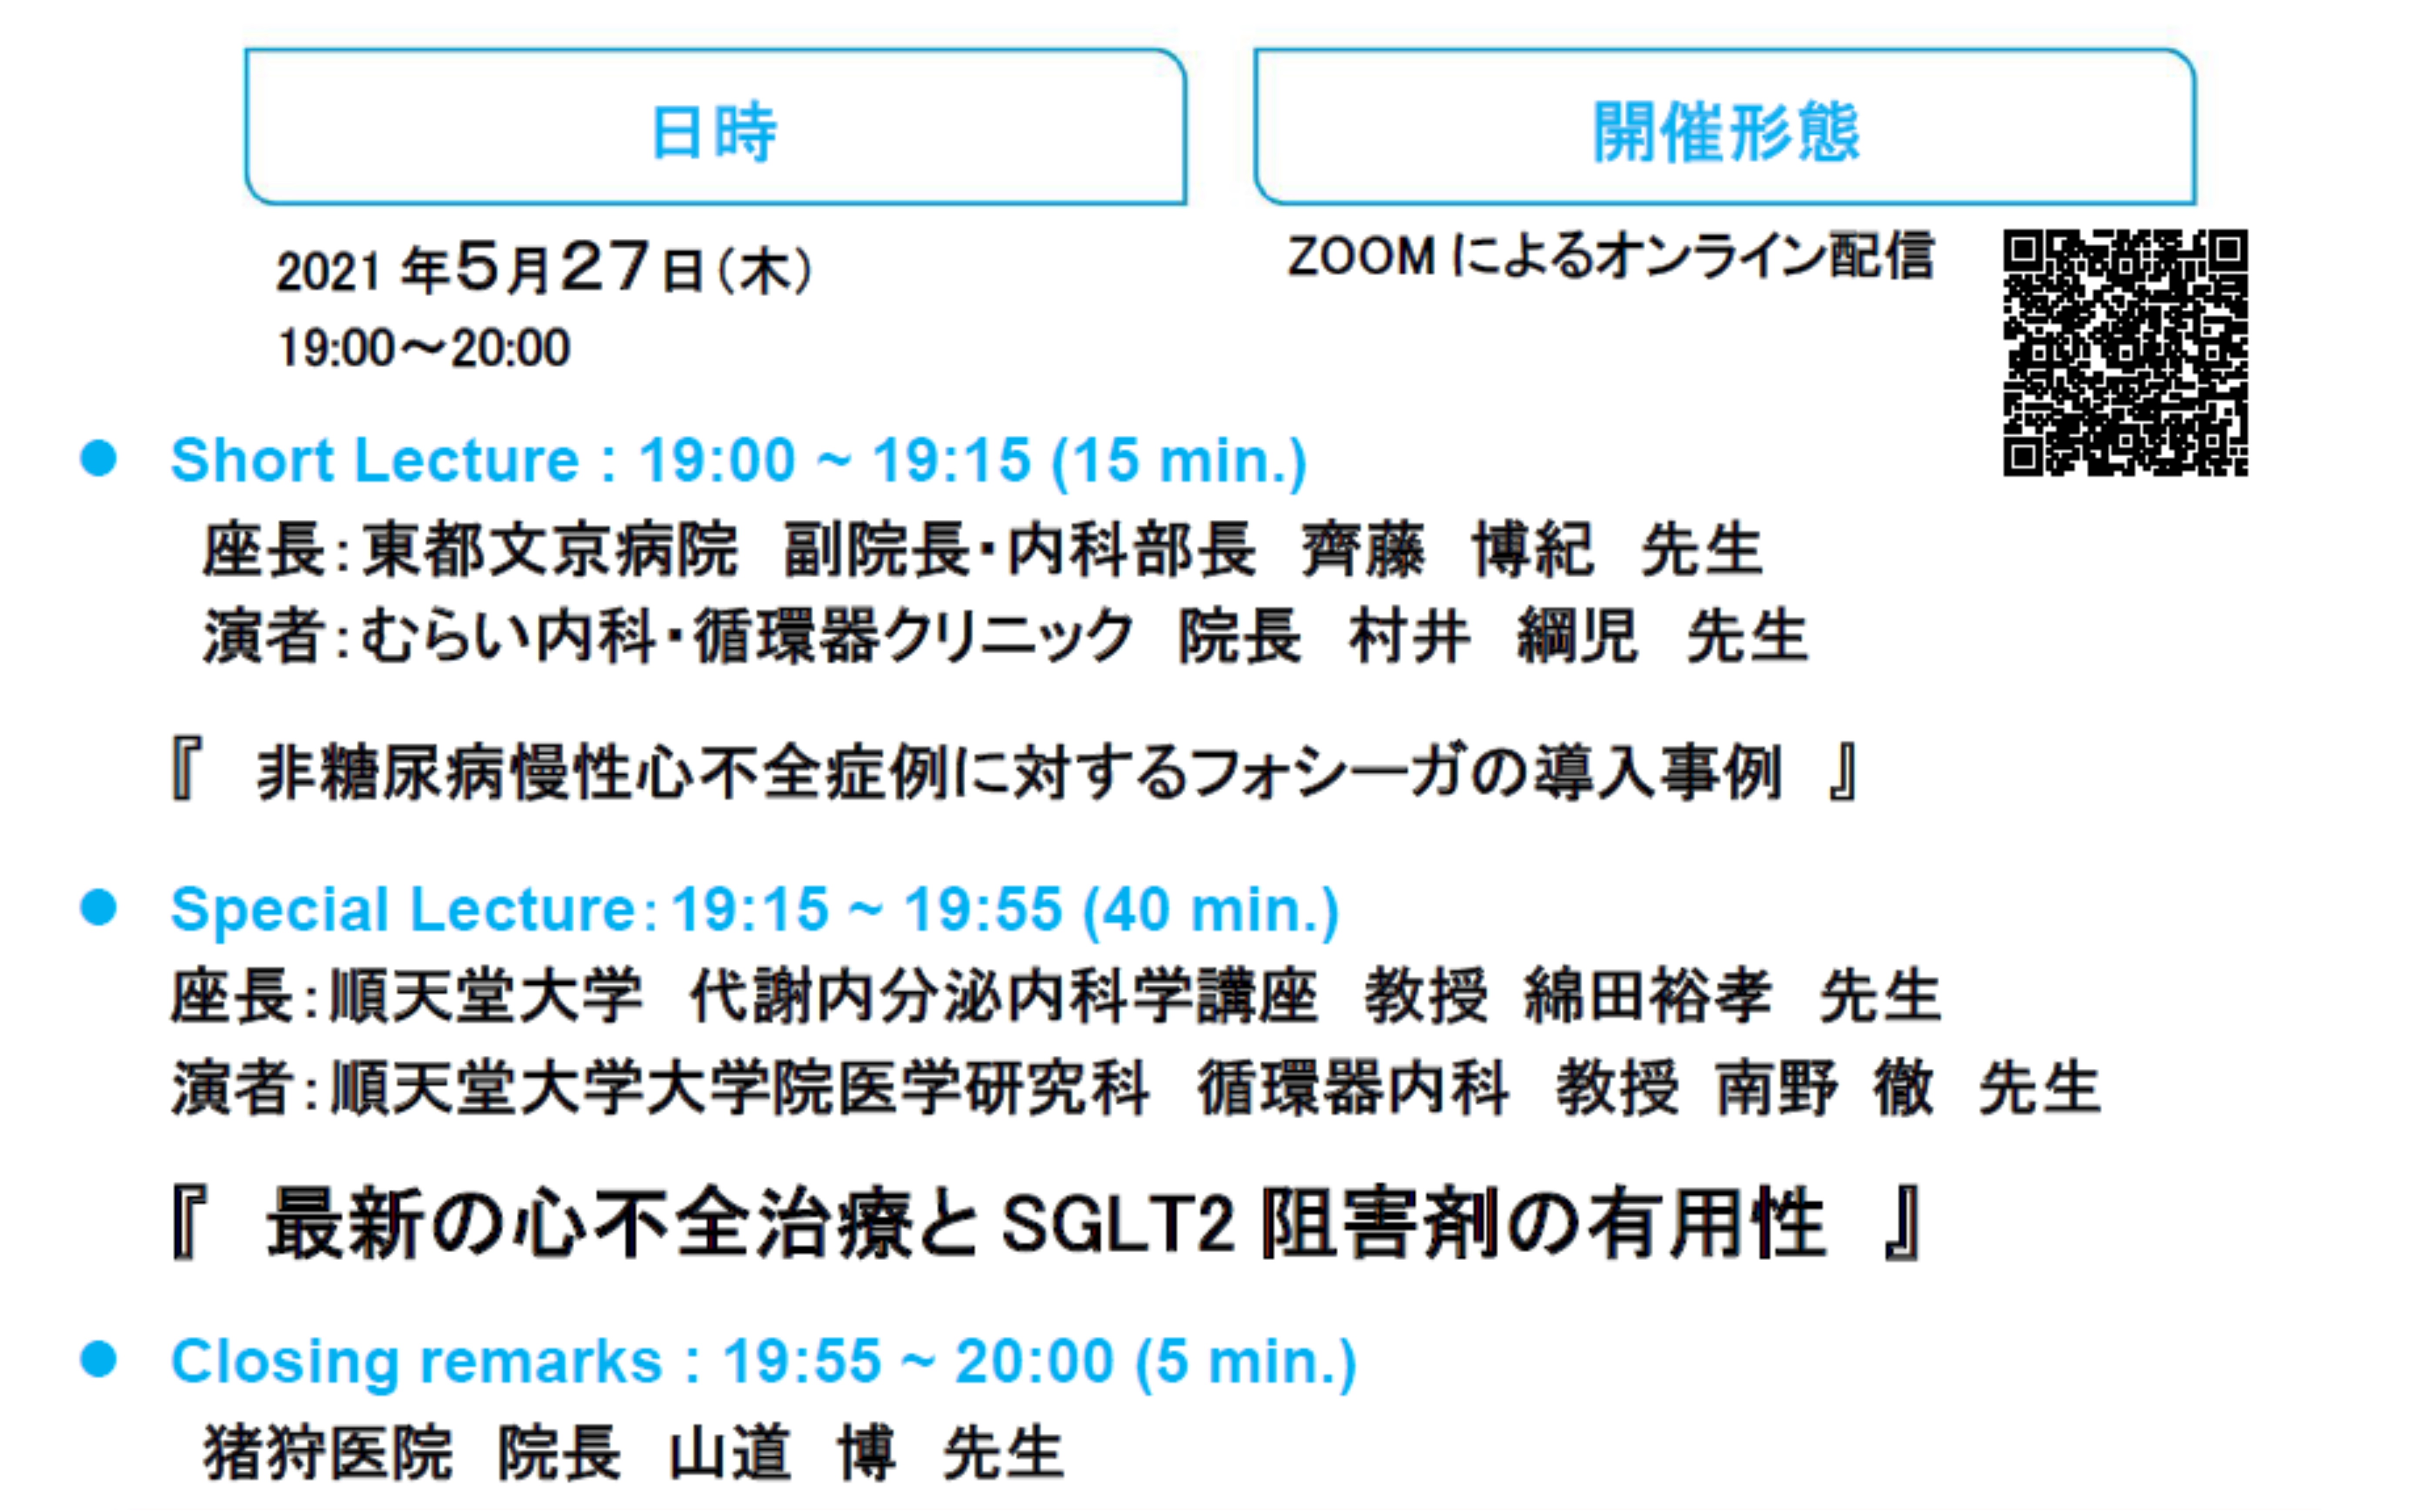 Forxiga Online Symposium 2021 in 文京